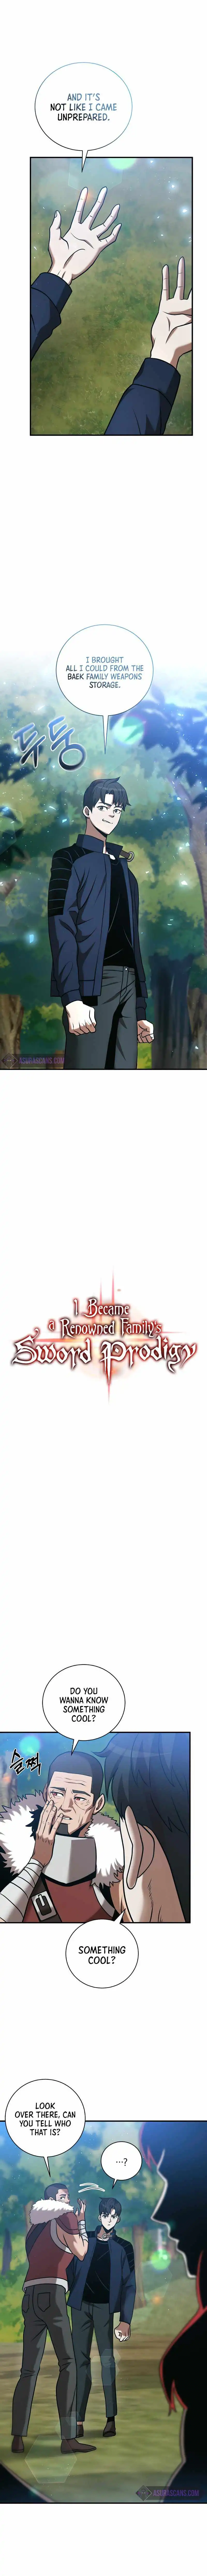 I Became a Renowned Family's Sword Prodigy Chapter 20 3